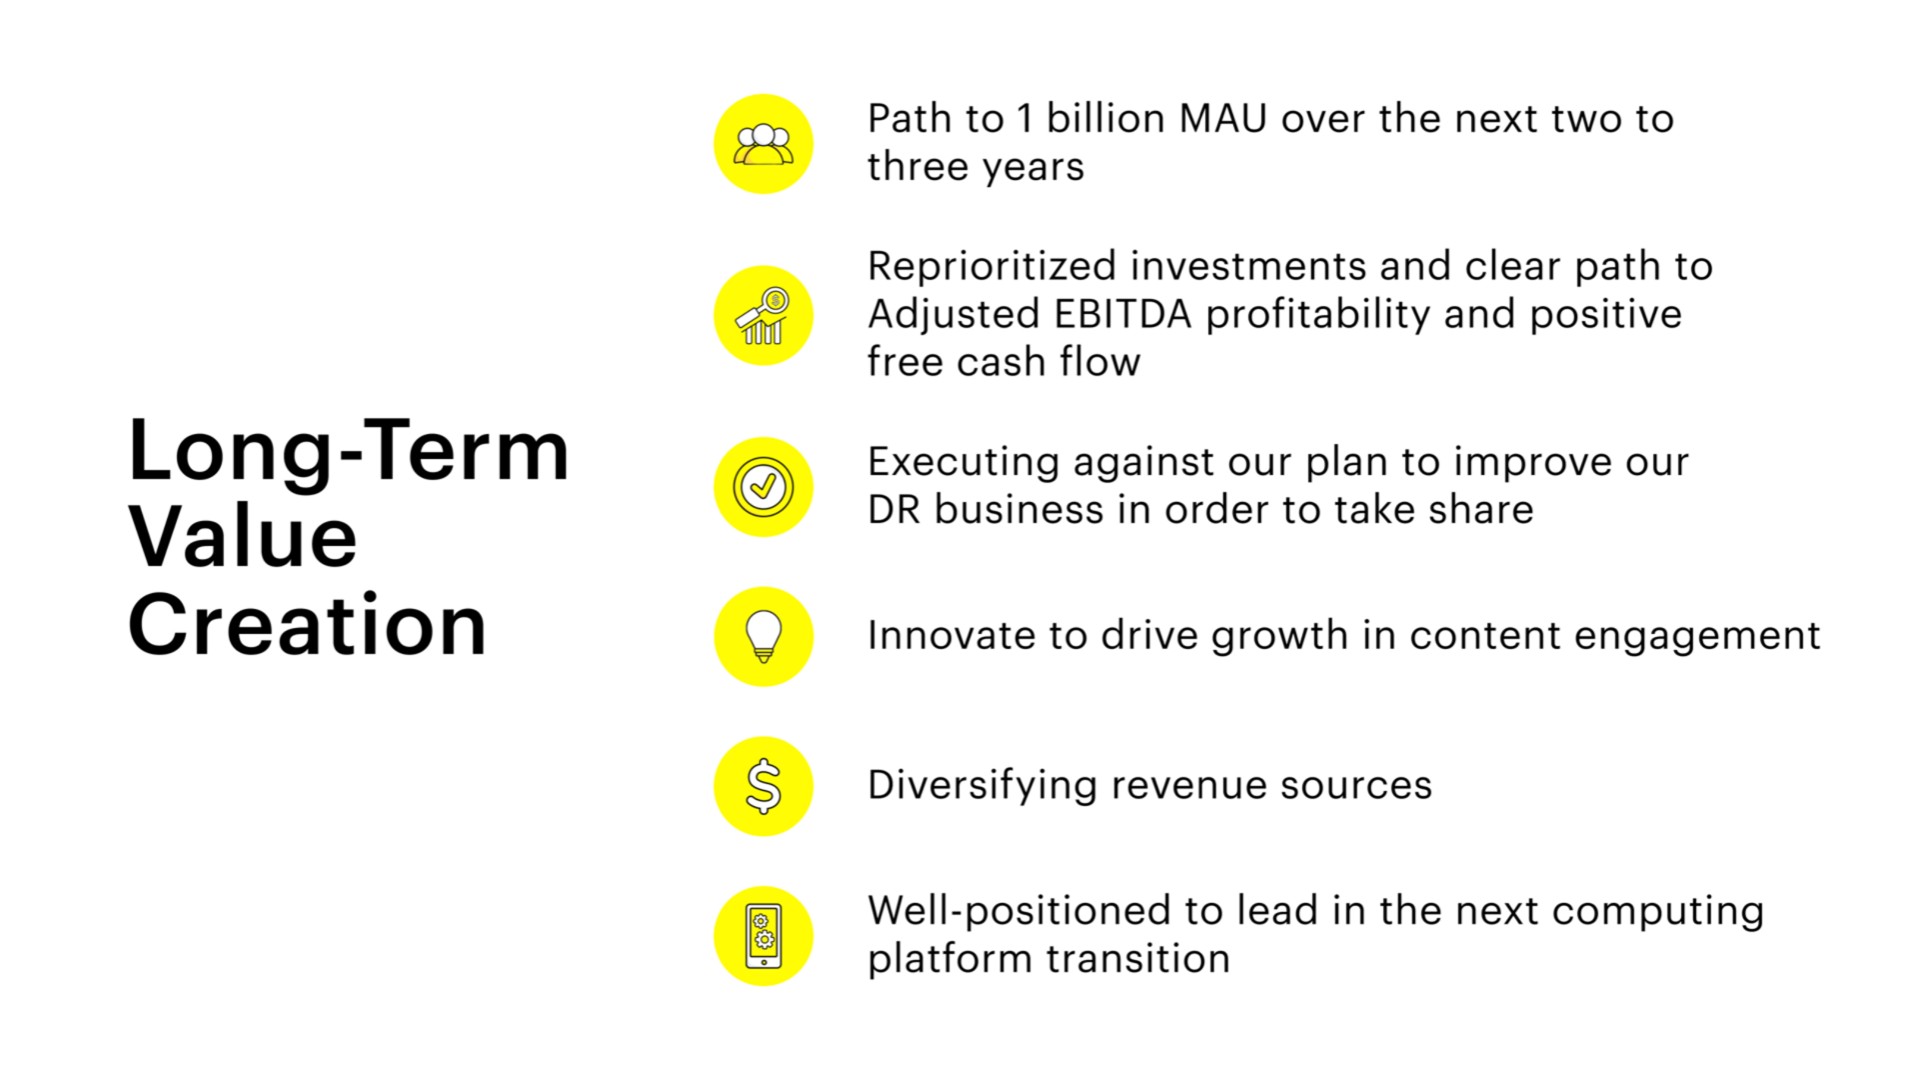 three years long term value creation investments and clear path to adjusted profitability and positive free cash flow innovate to drive growth in content engagement diversifying revenue sources well positioned to lead in the next computing platform transition | Snap Inc